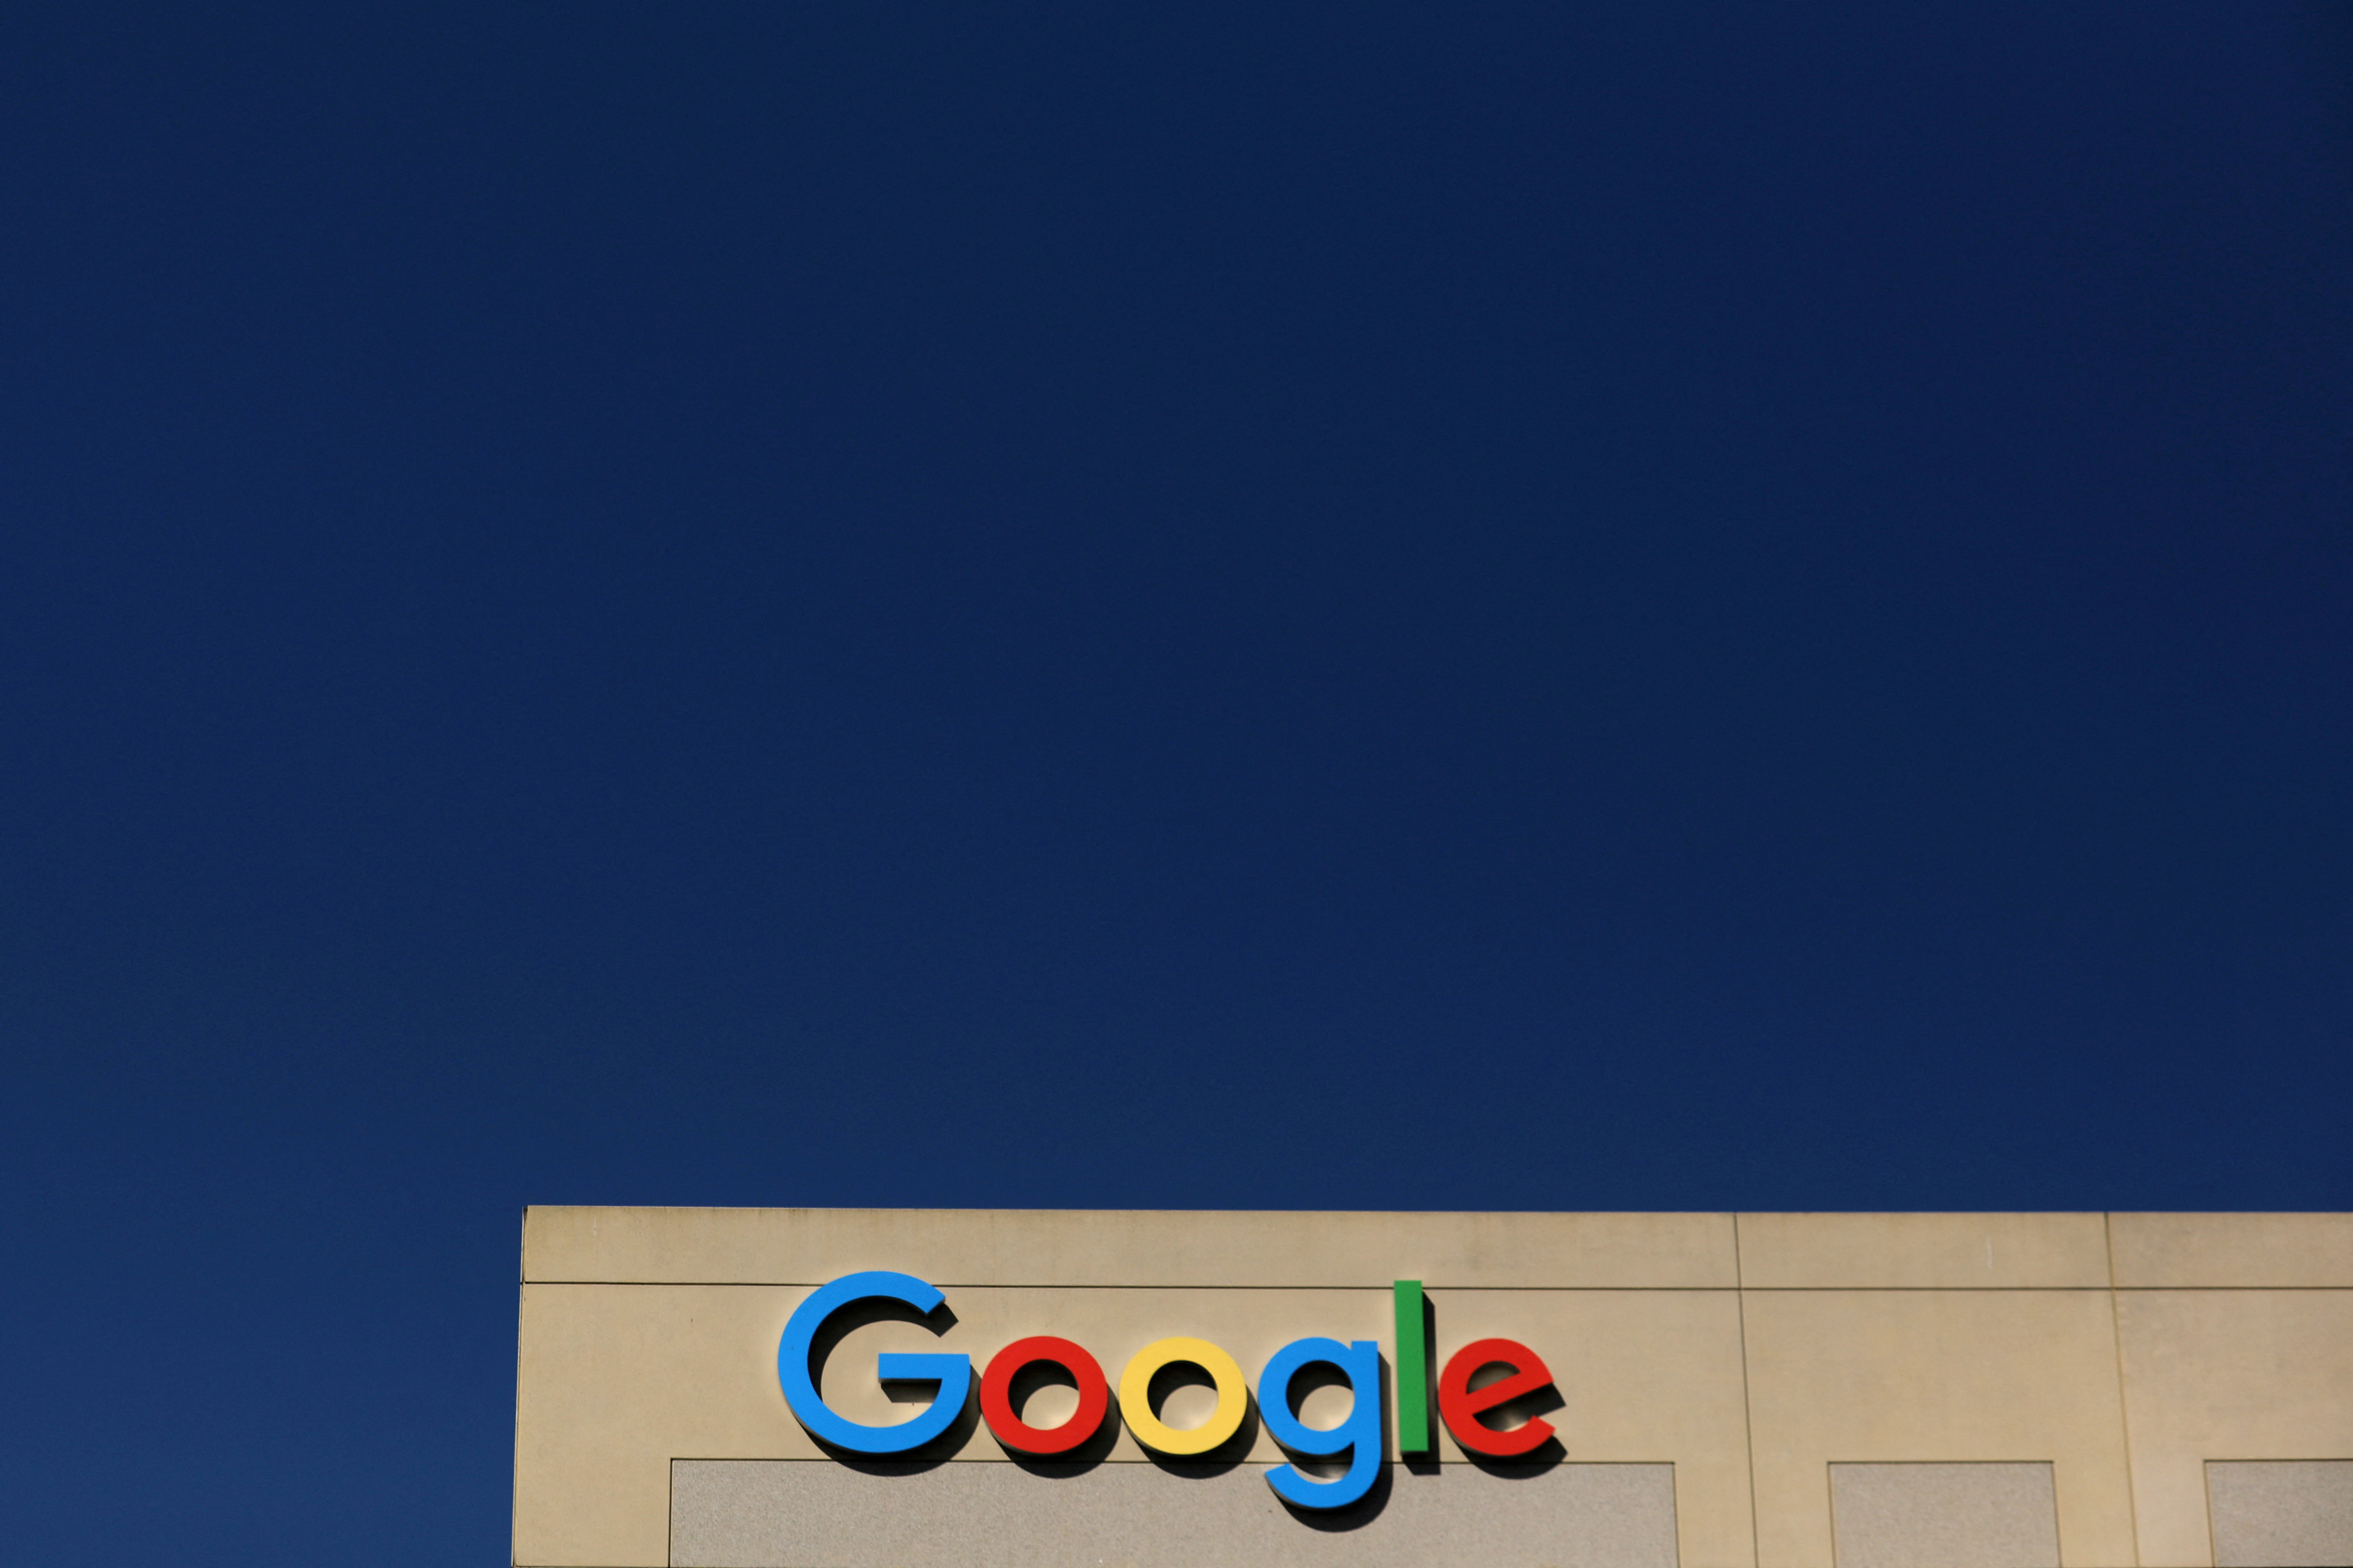 Alphabet shares fall on report Samsung may dump Google Search for Bing | Reuters